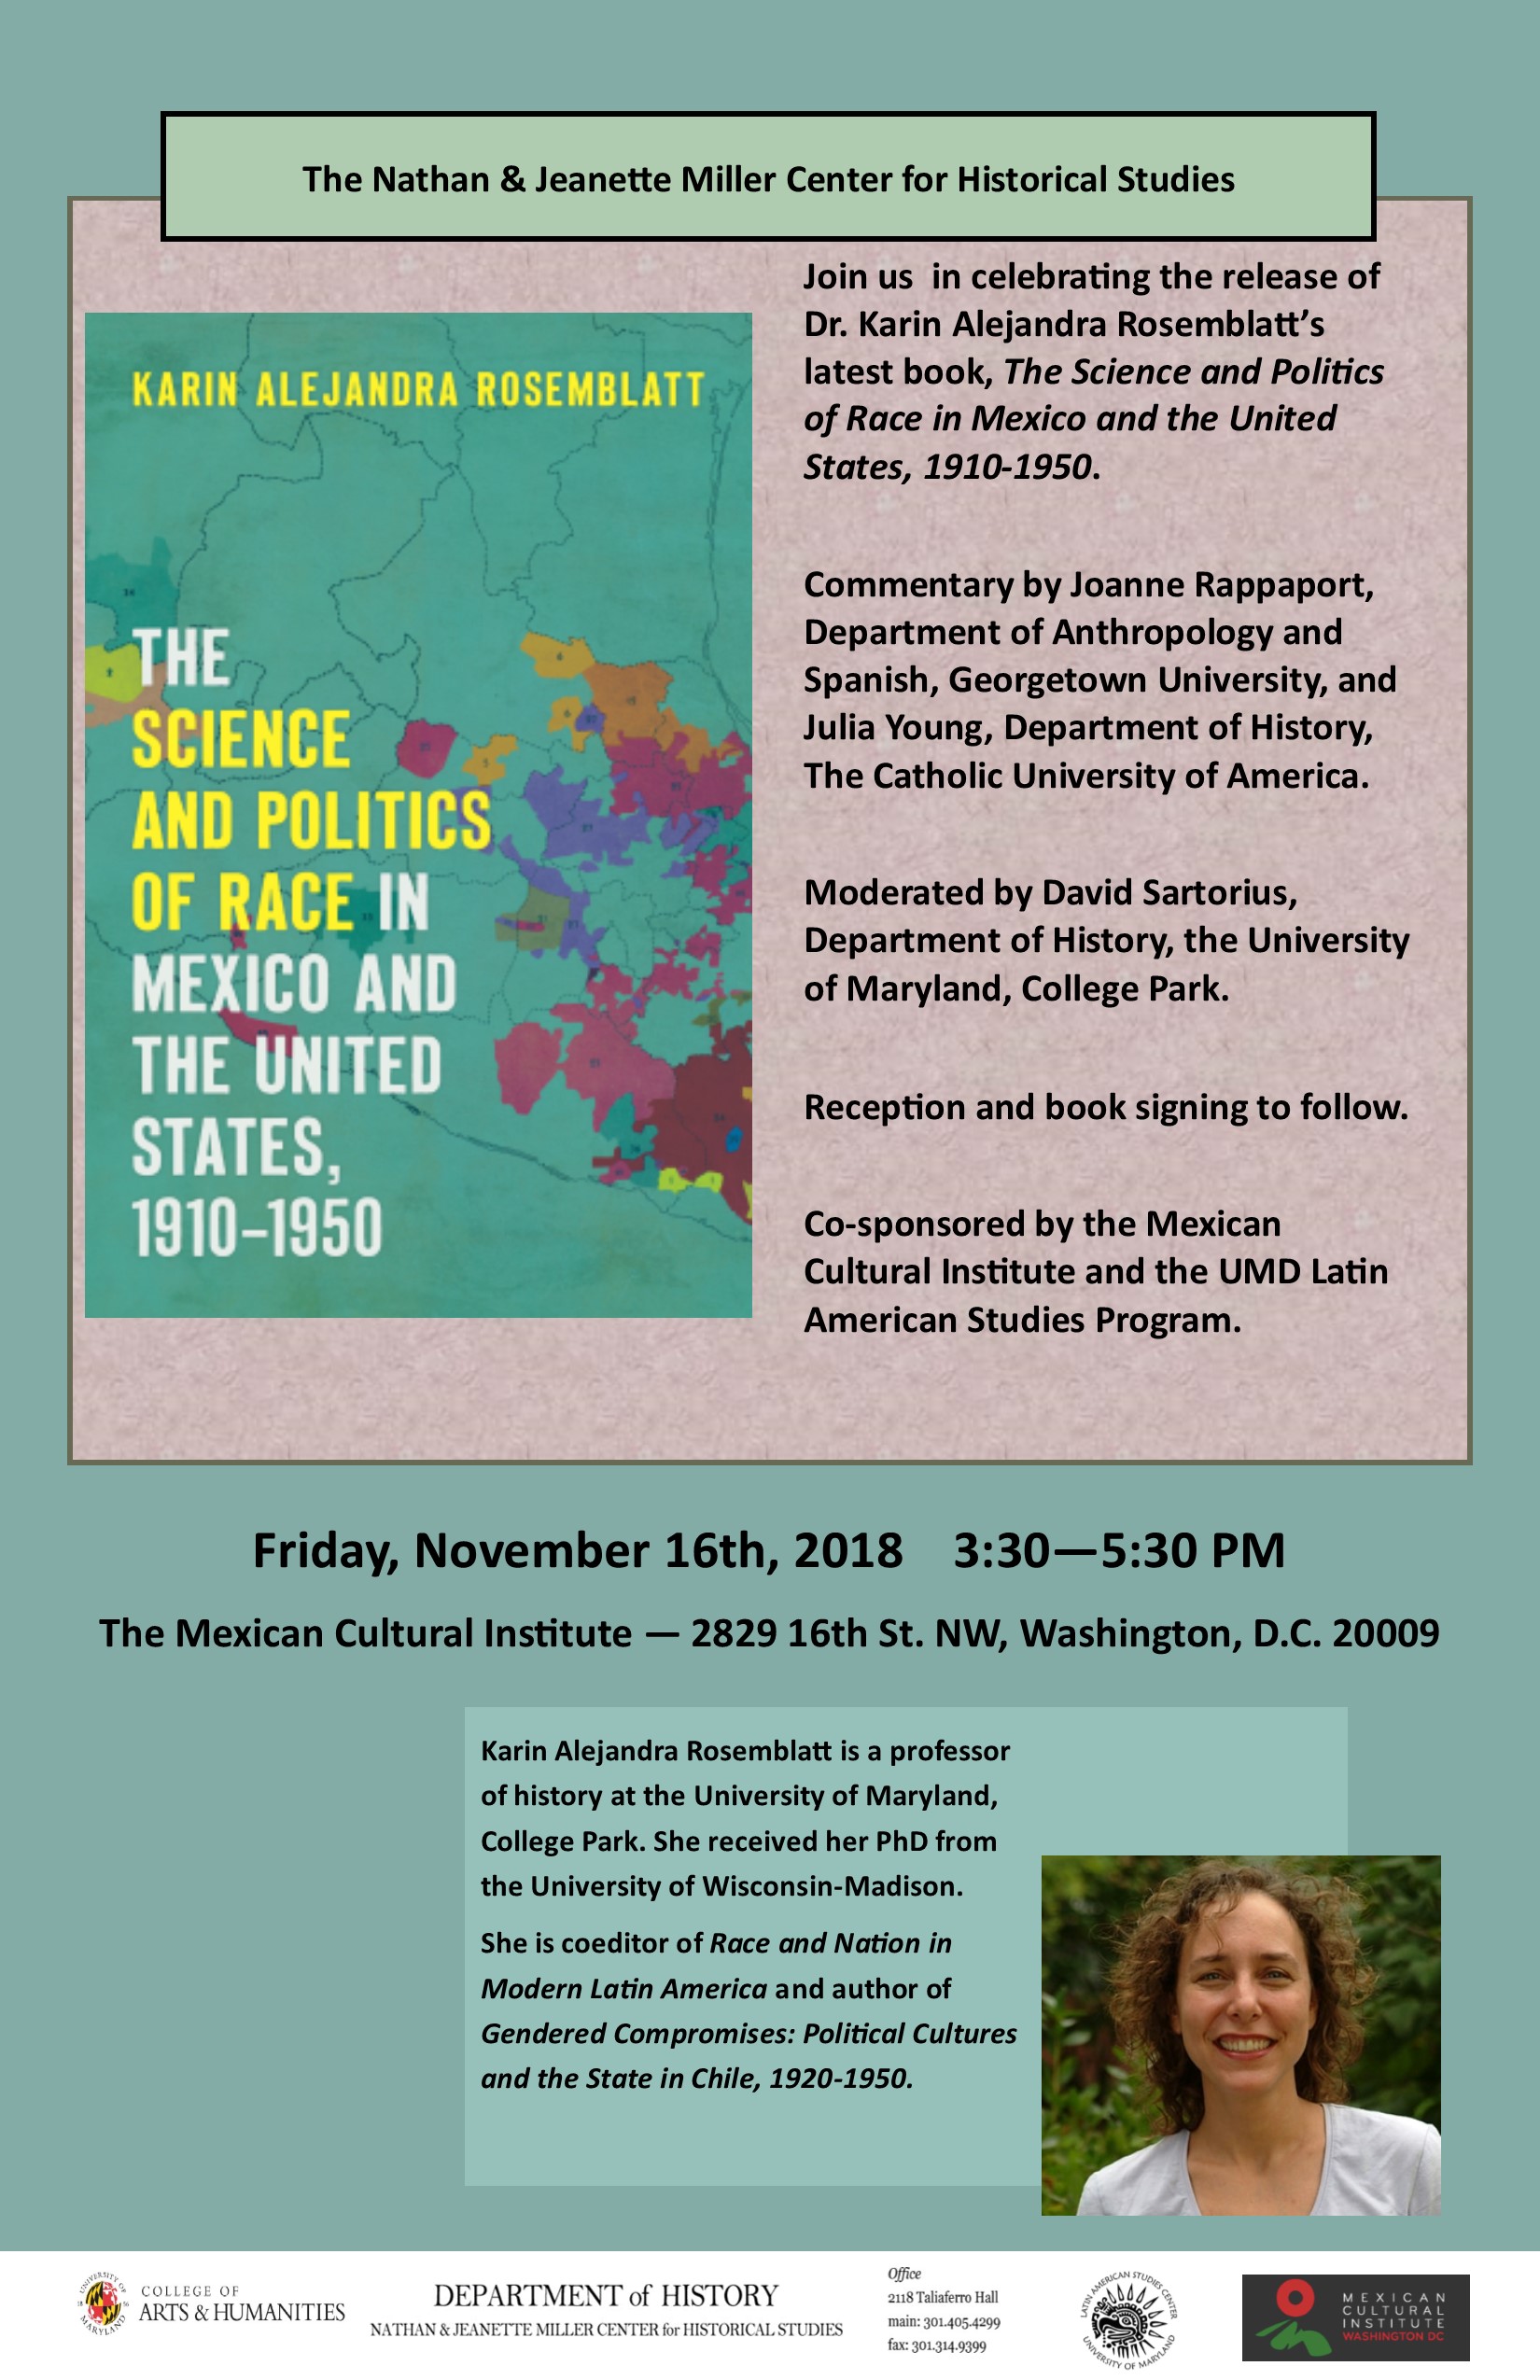 Image for event - The Science and Politics of Race in Mexico and the United States, 1910-1950